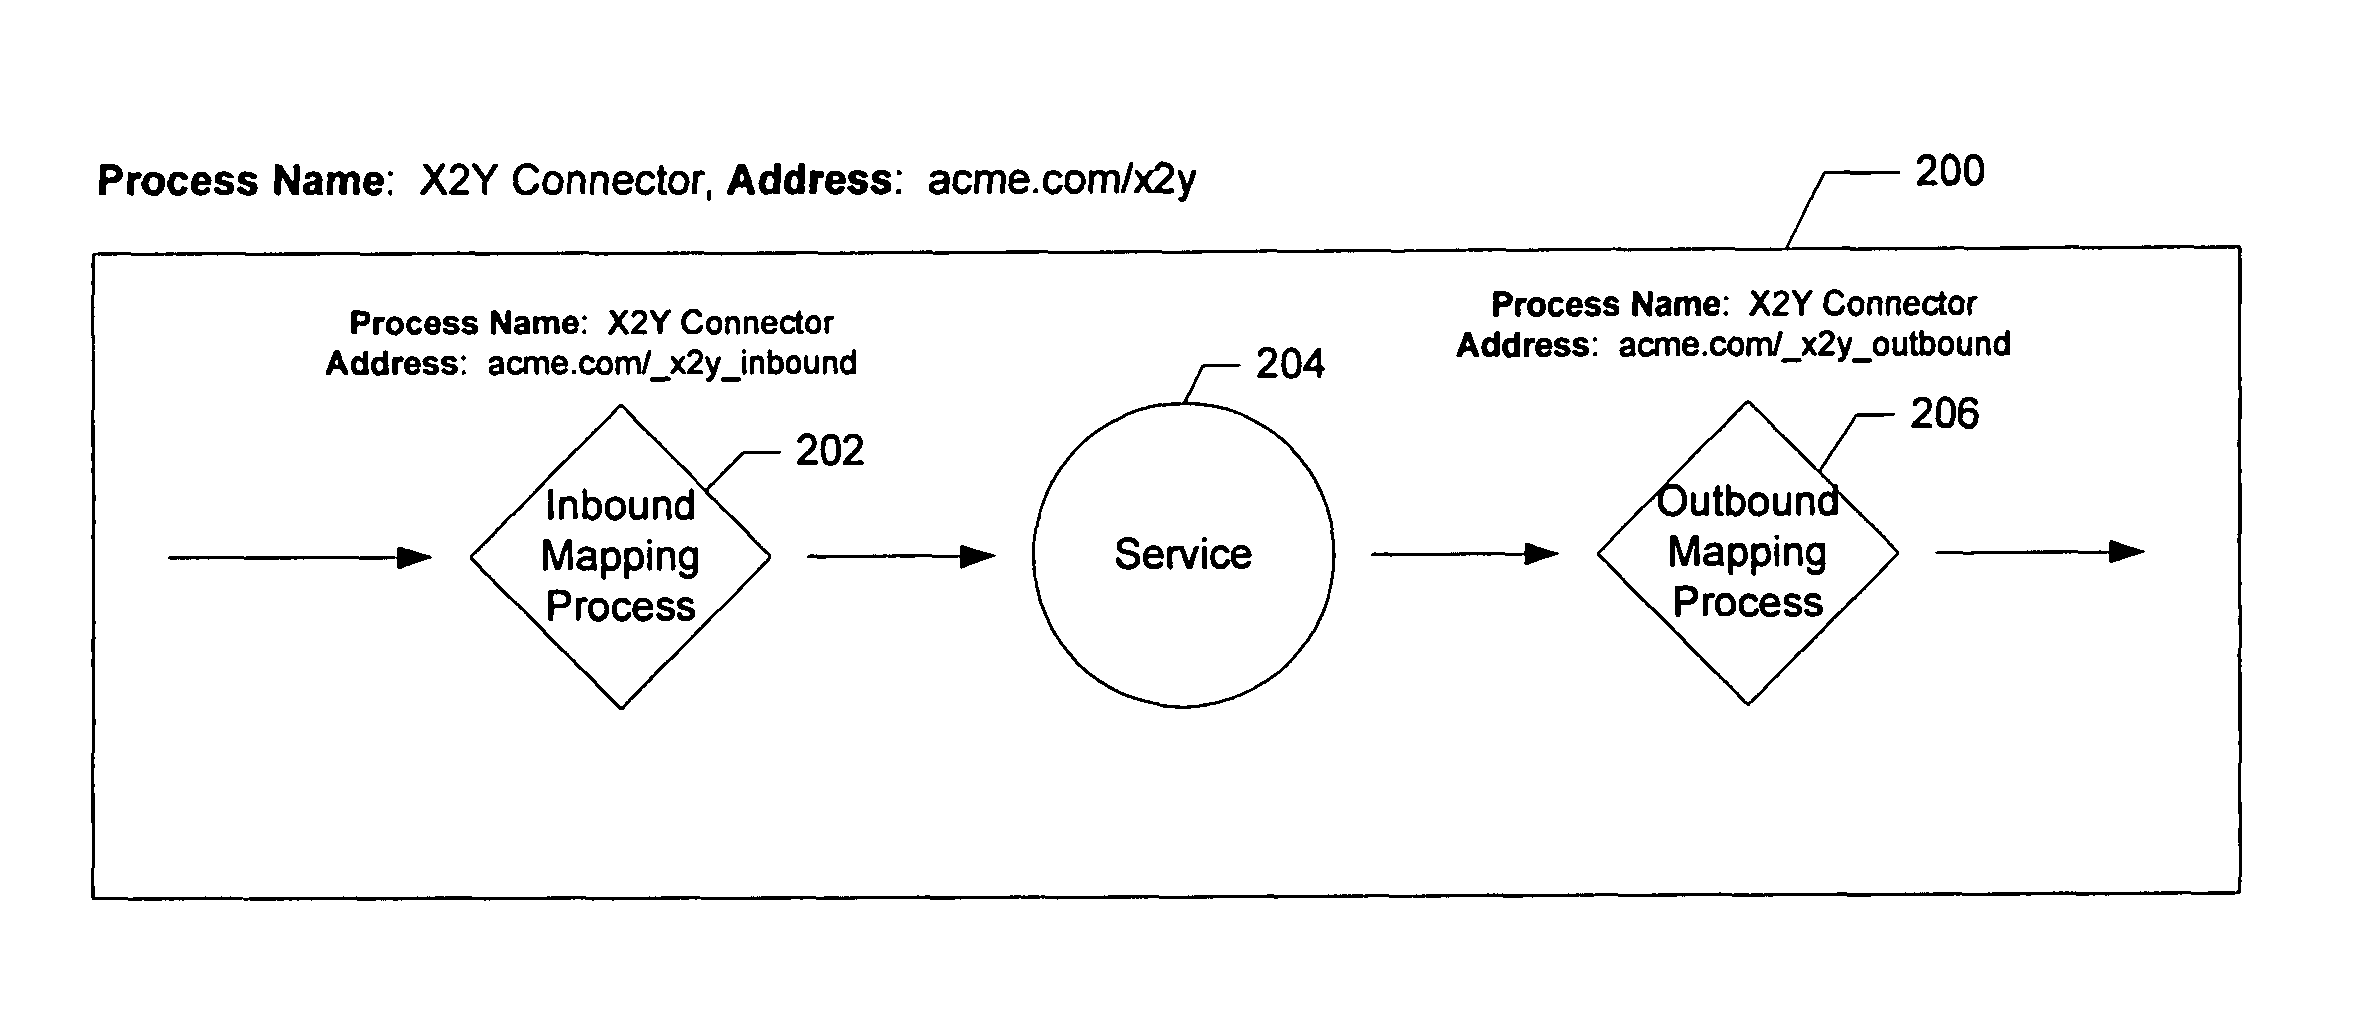 Techniques for providing connections to services in a network environment